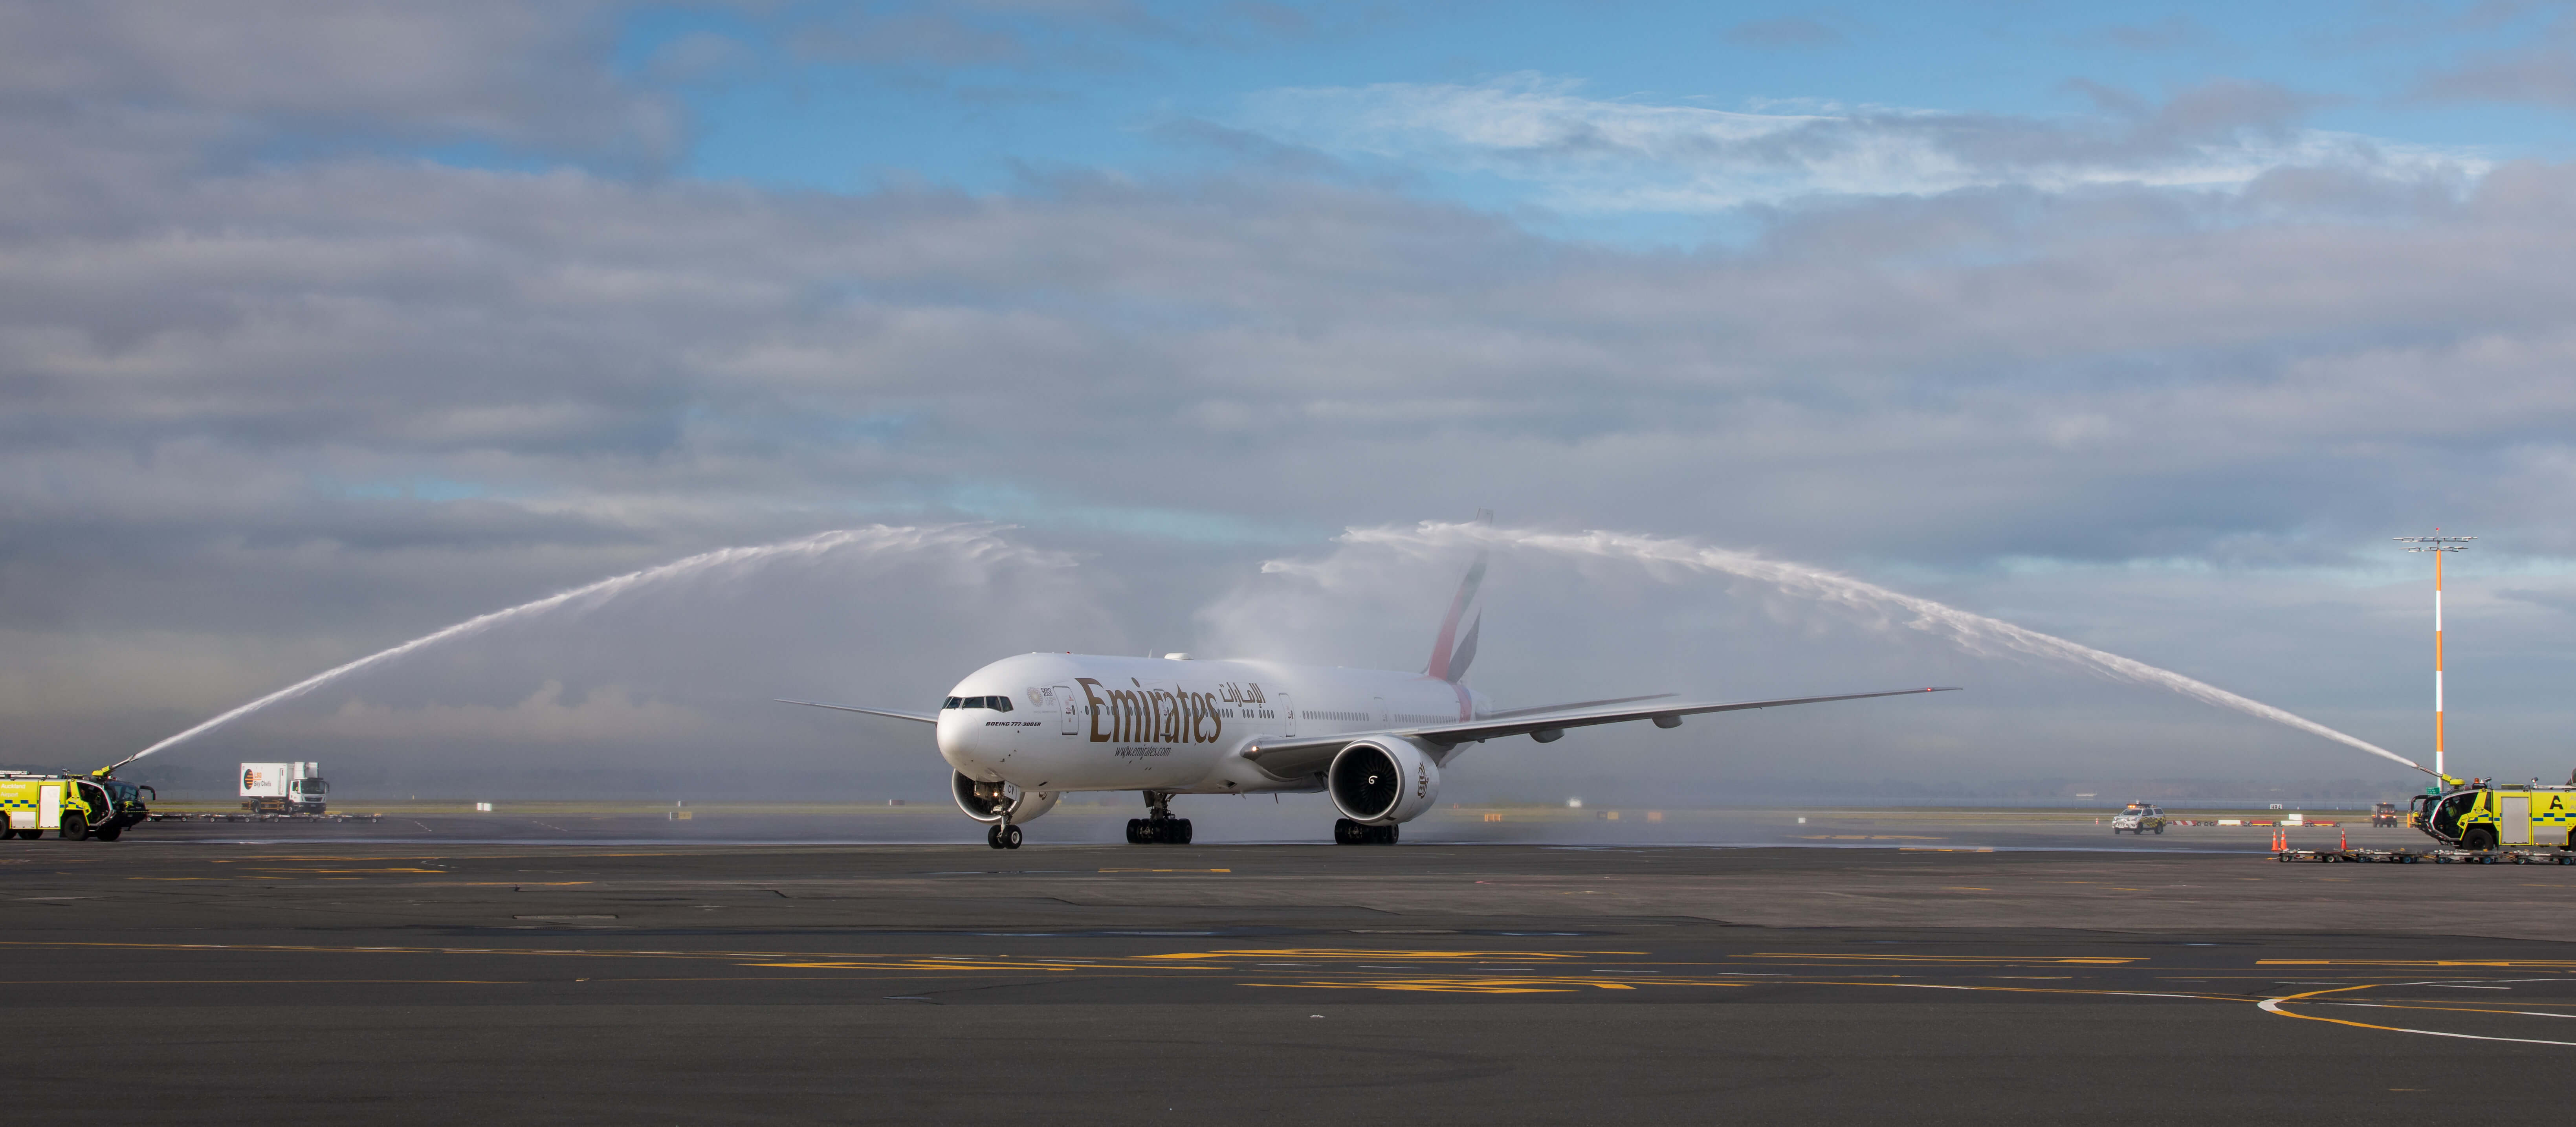 Emirates fifth freedom Flight EK450 between Bali and New Zealand was greeted with a traditional water cannon salute on arrival in Auckland.